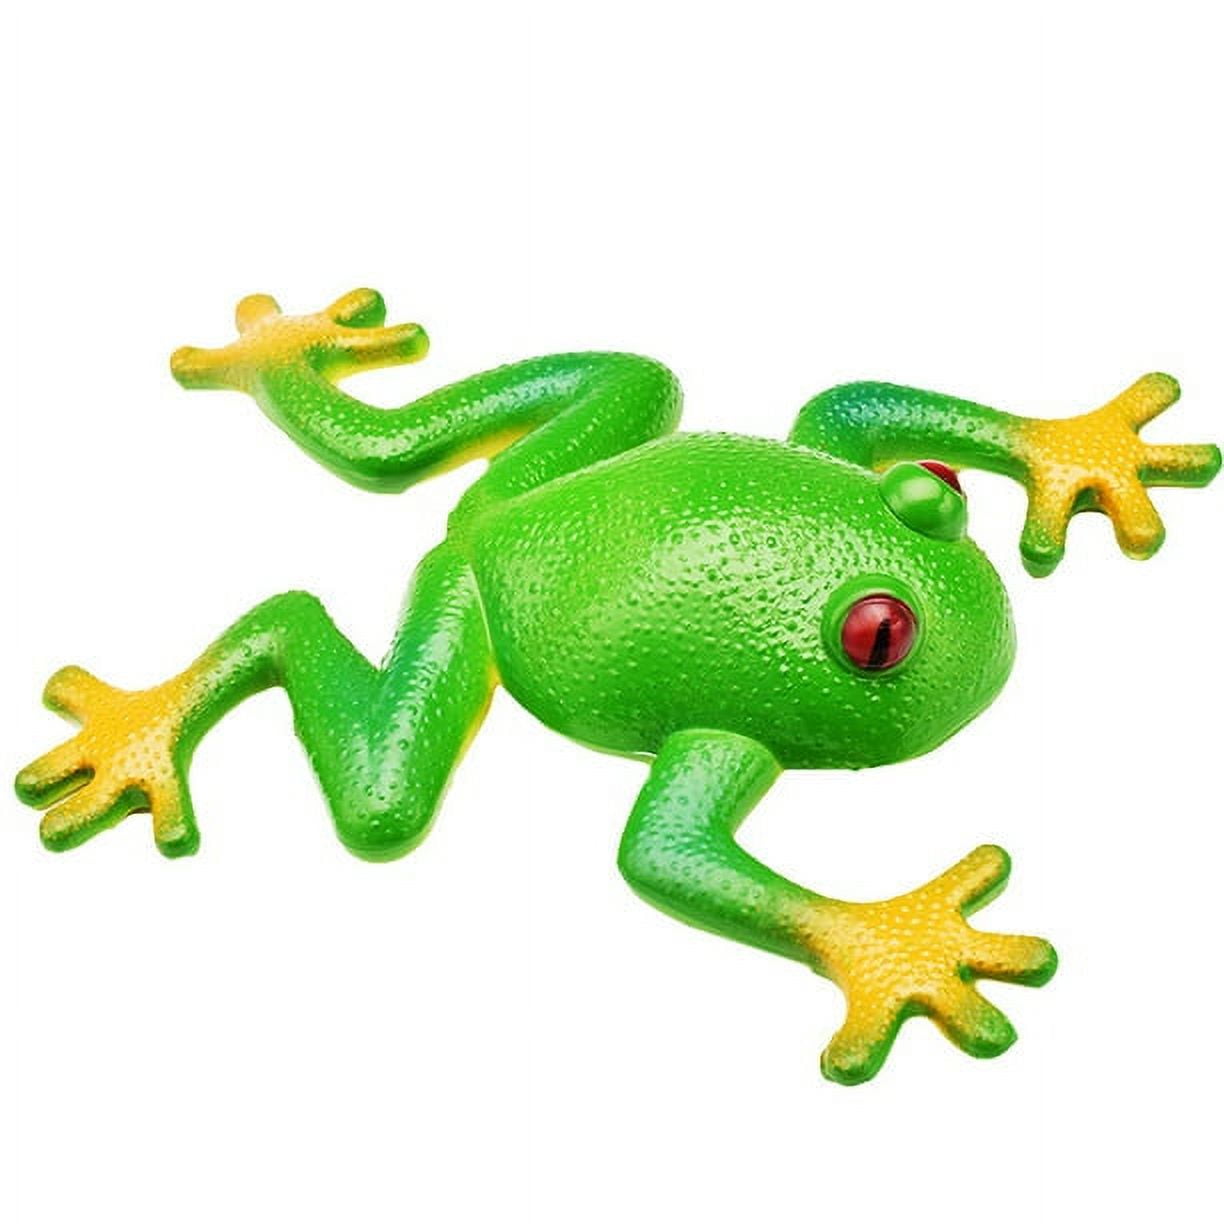 Fun Express Vinyl Realistic Sticky Splat Frogs Party Pack (48 Piece)